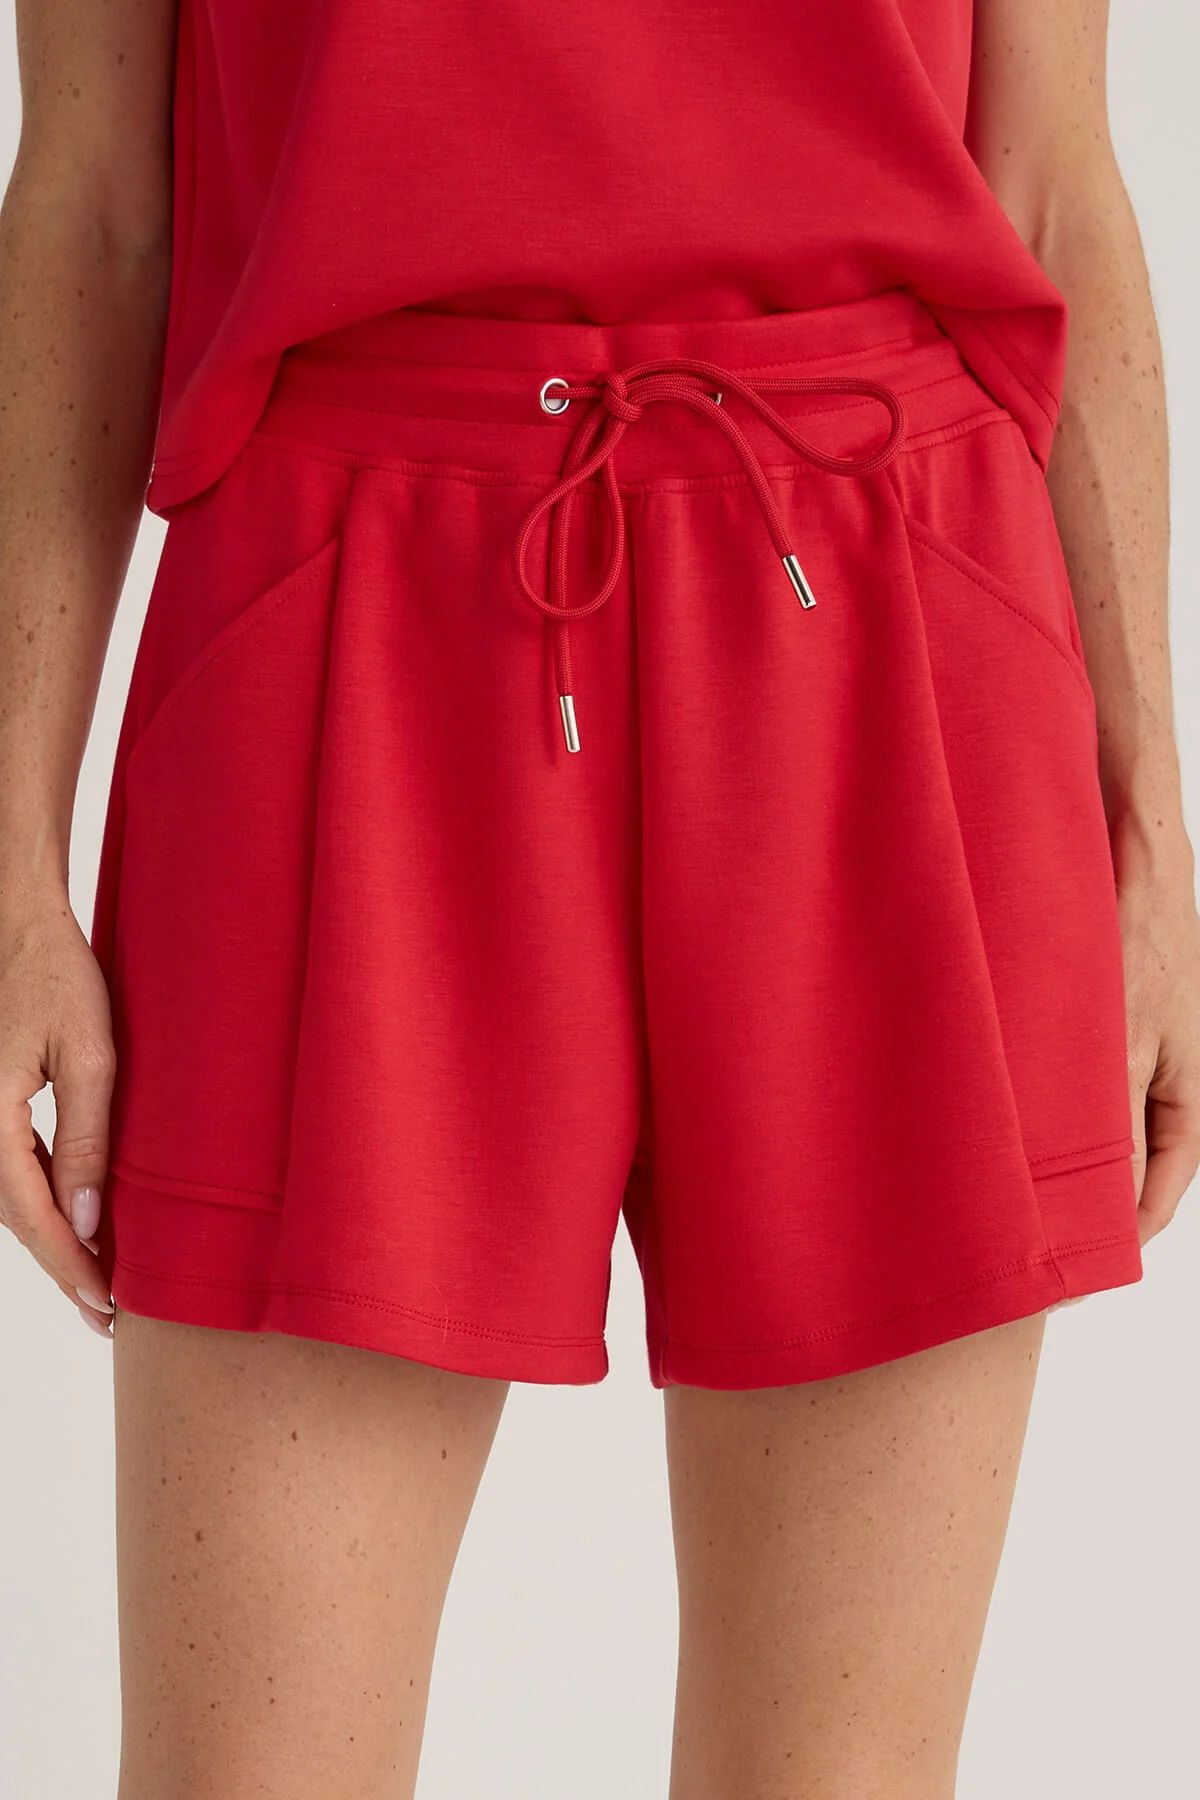 RD Style Senza Soft Knit Shorts | Social Threads